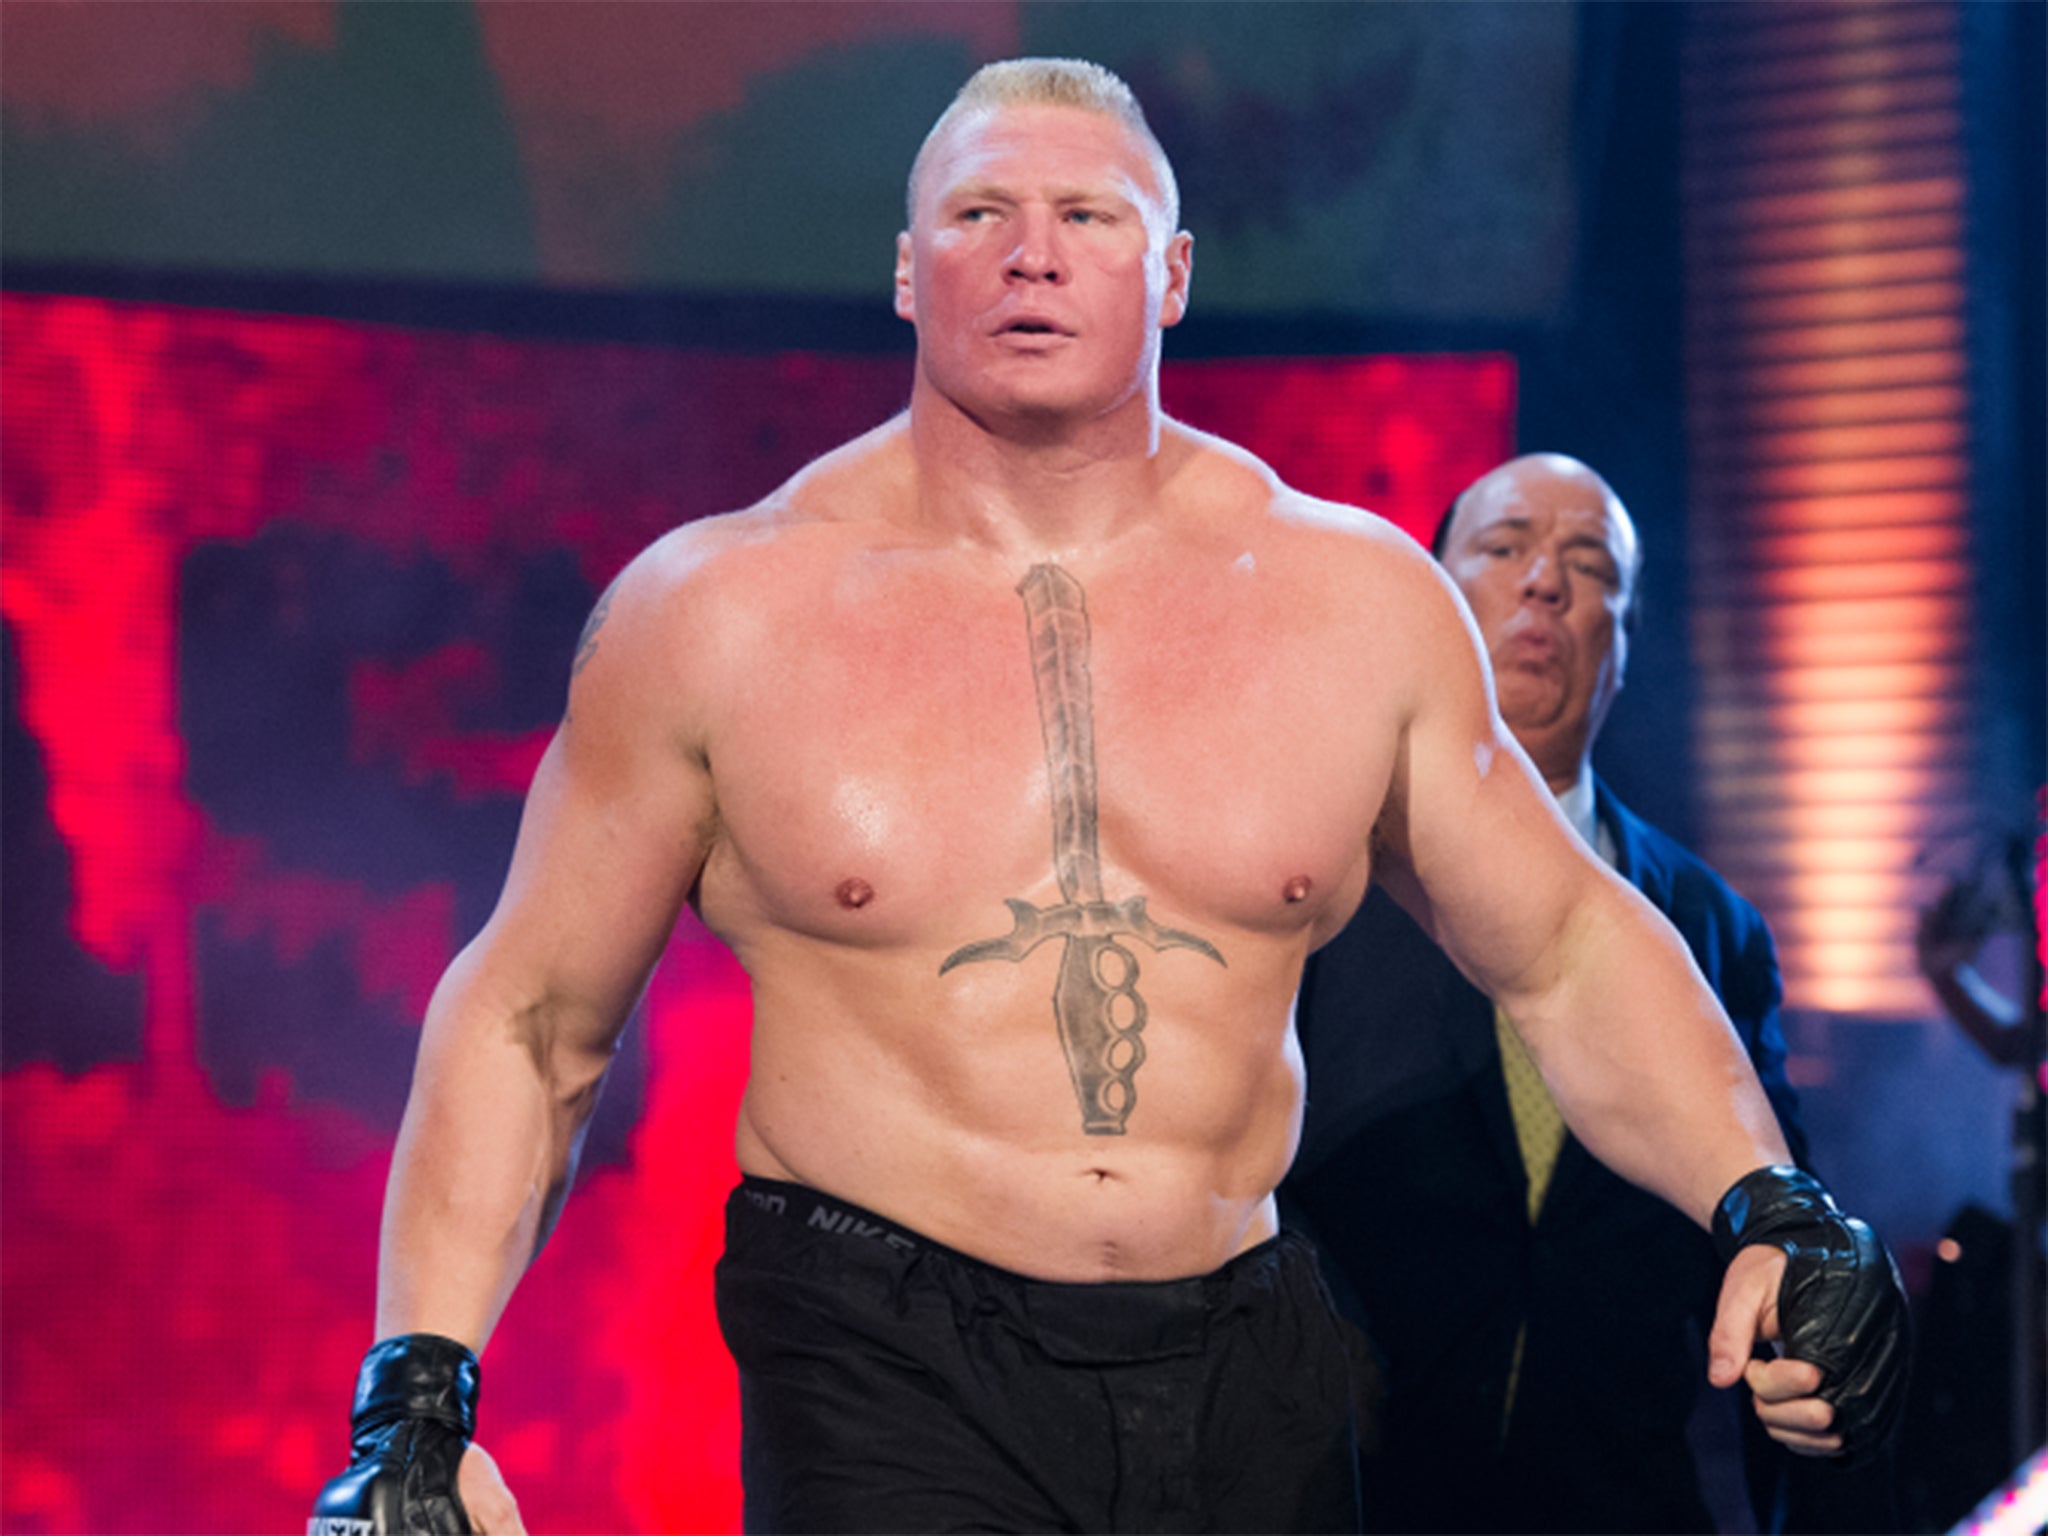 Brock Lesnar could lose his title even if he isn't pinned